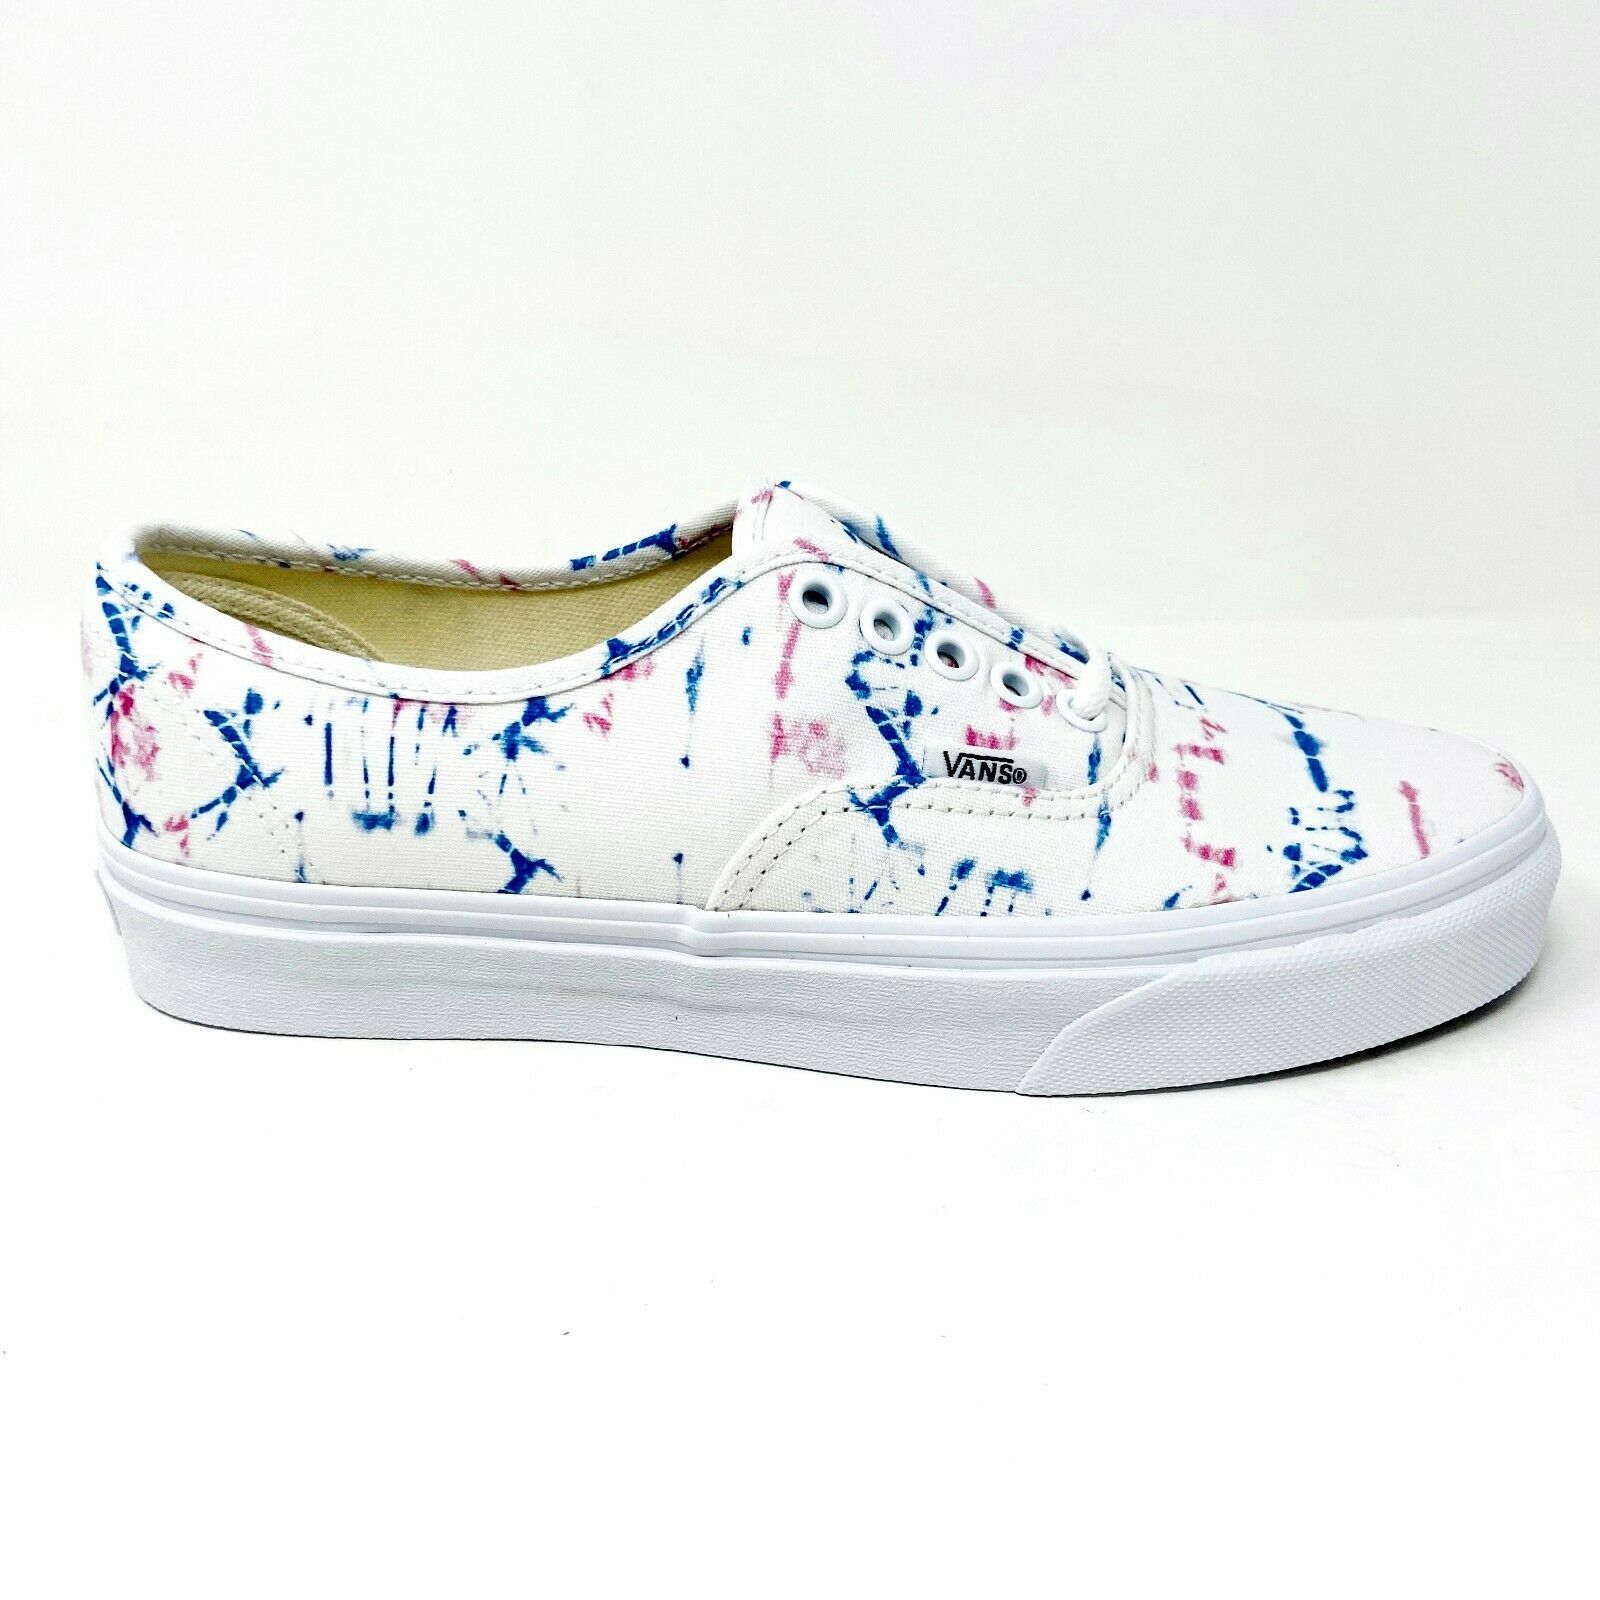 Primary image for Vans Madewell Authentic Stained True White Tie Dye Womens Casual Shoes